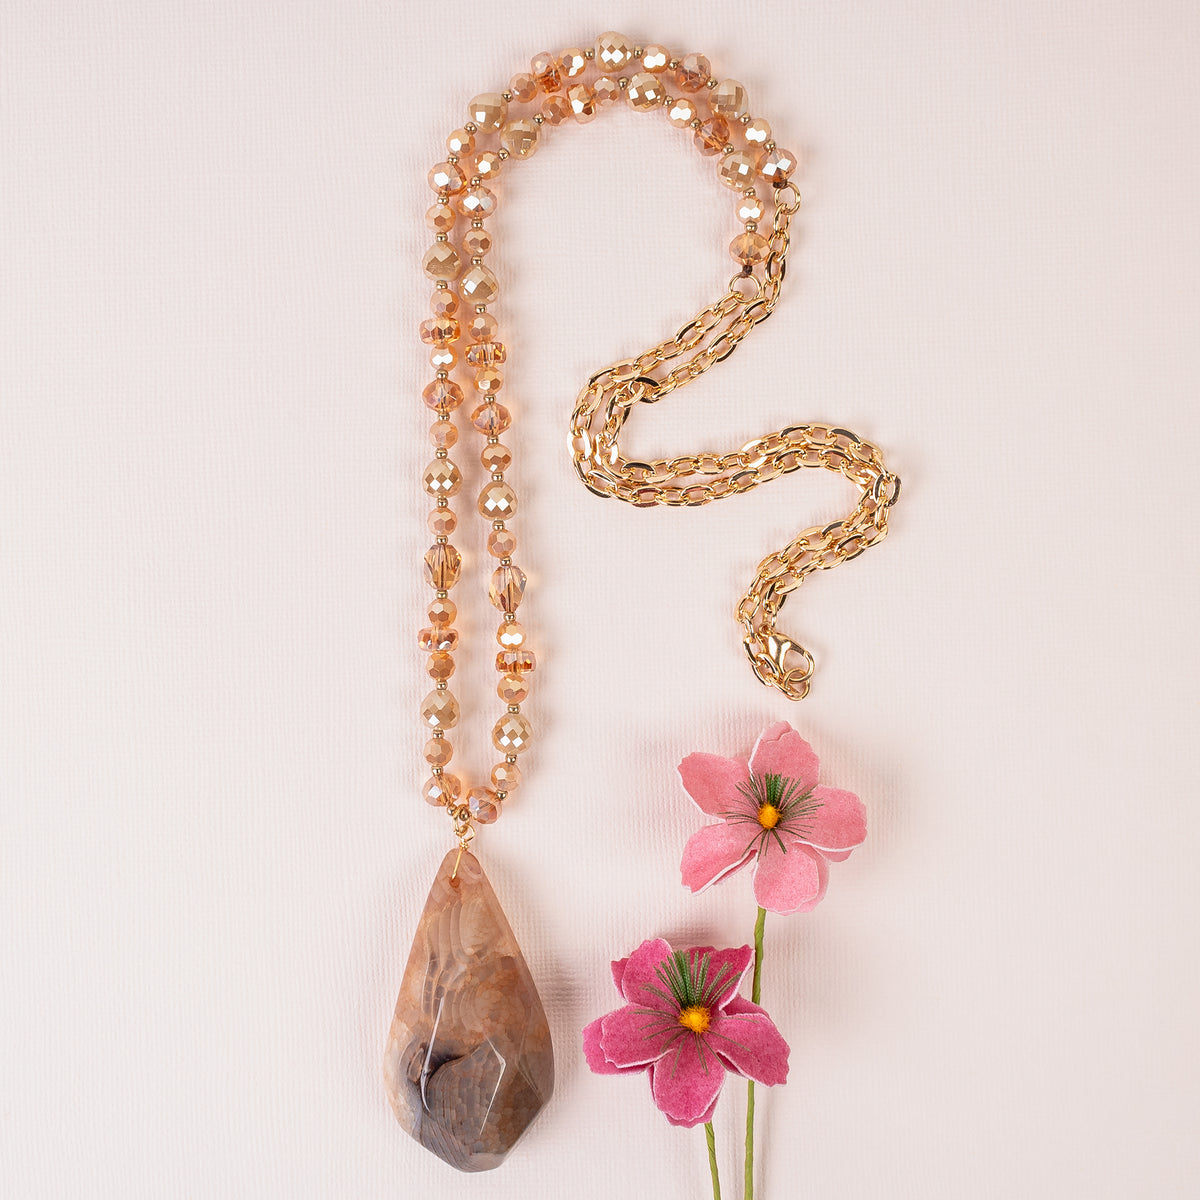 72979 - Natural Stone Necklace - Champagne